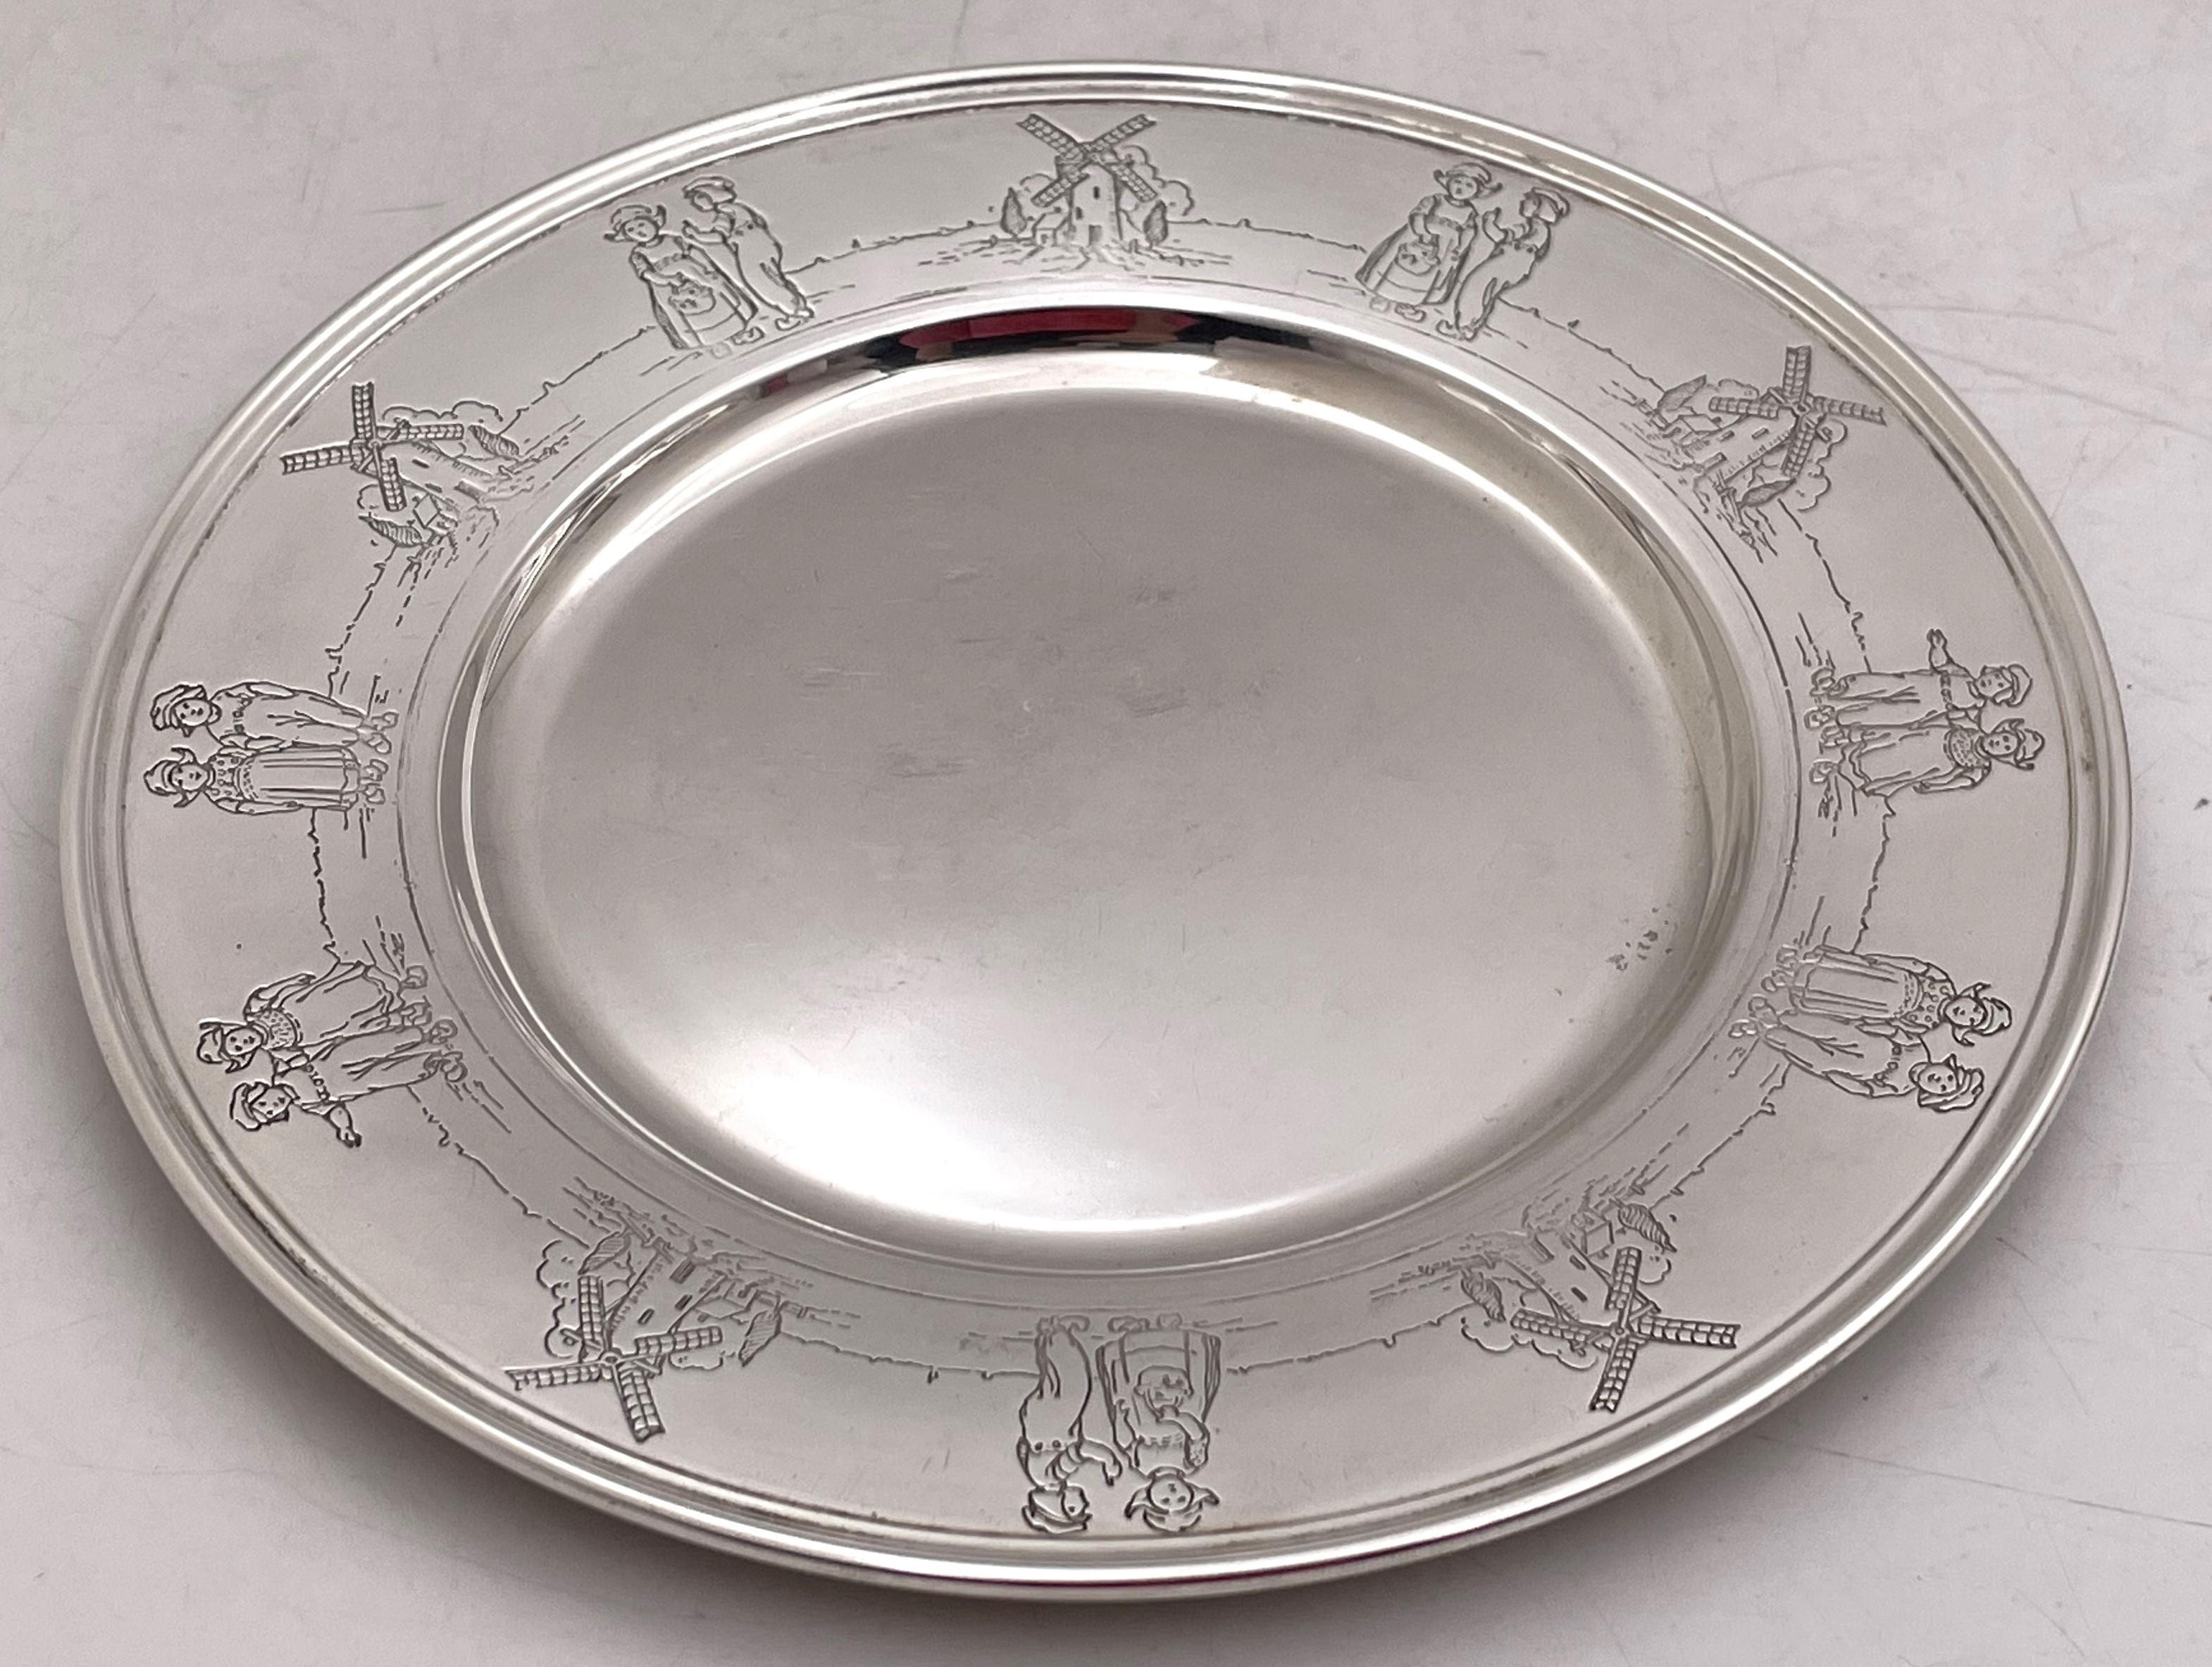 Gorham sterling silver child bowl (gilt inside) and underplate from 1927, beautifully adorned with children pursuing outdoor activities. The bowl measures 4 1/4'' in diameter by 1 7/8'' in height while the underplate measures 6 1/3'' in diameter.